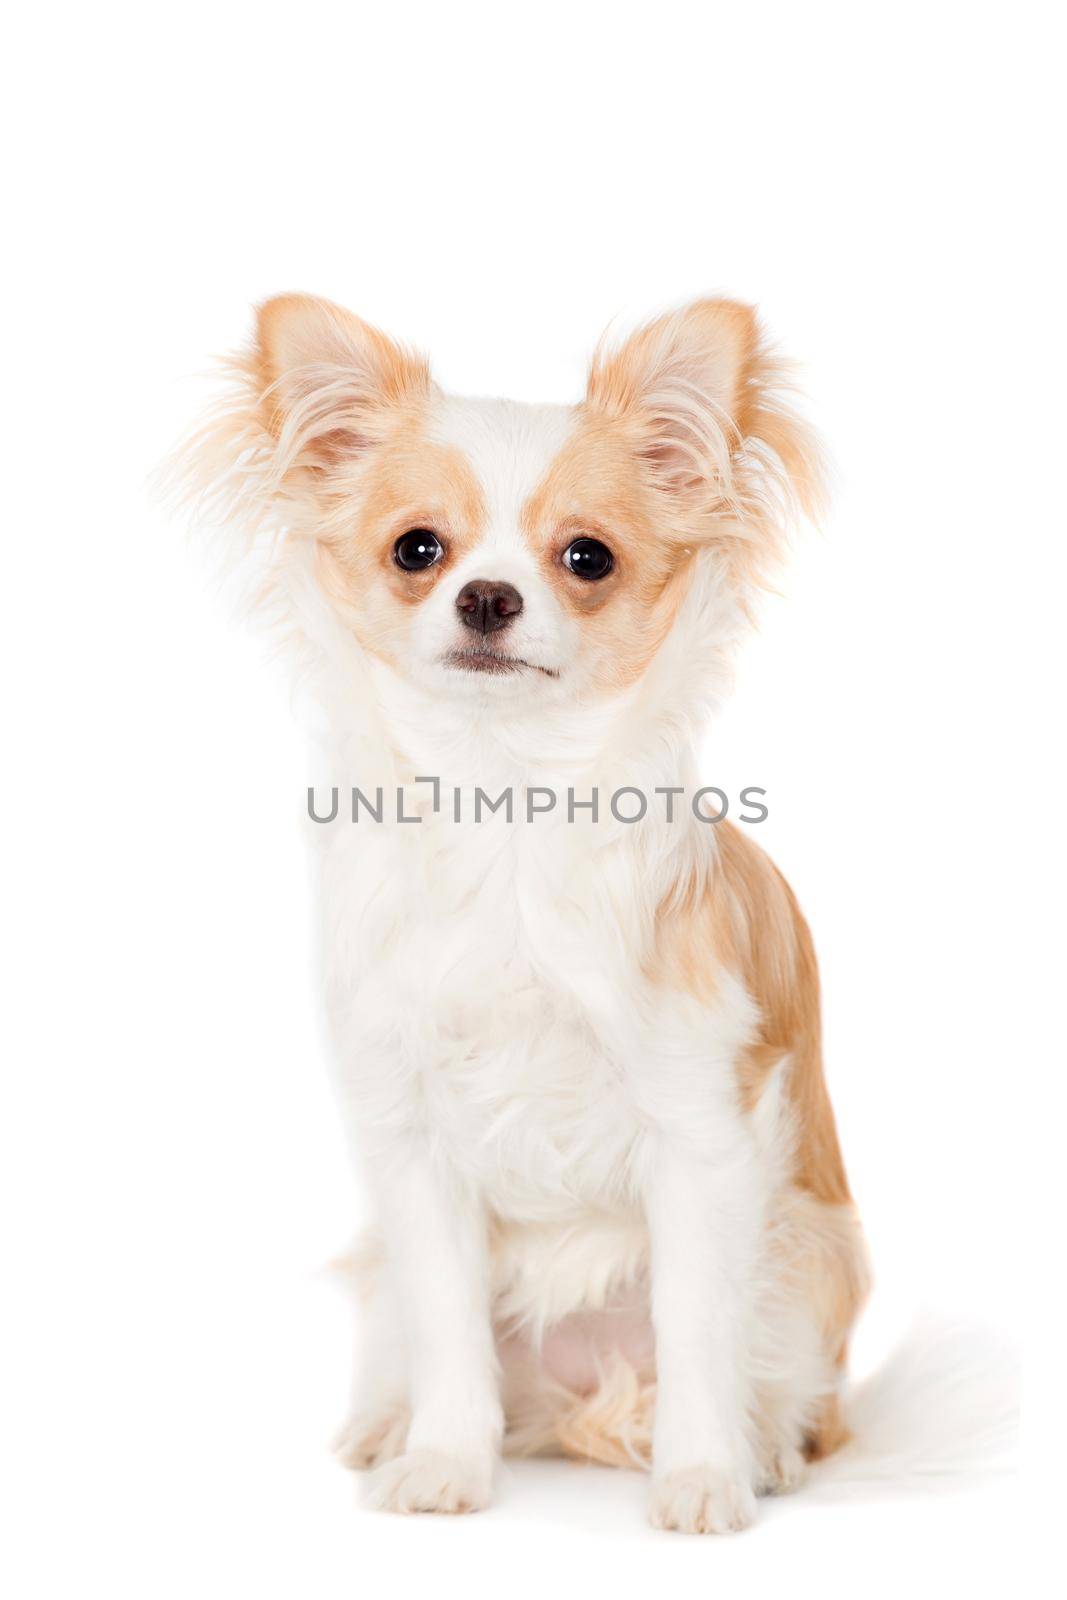 Chihuahua, 3 years old, isolated on the white background